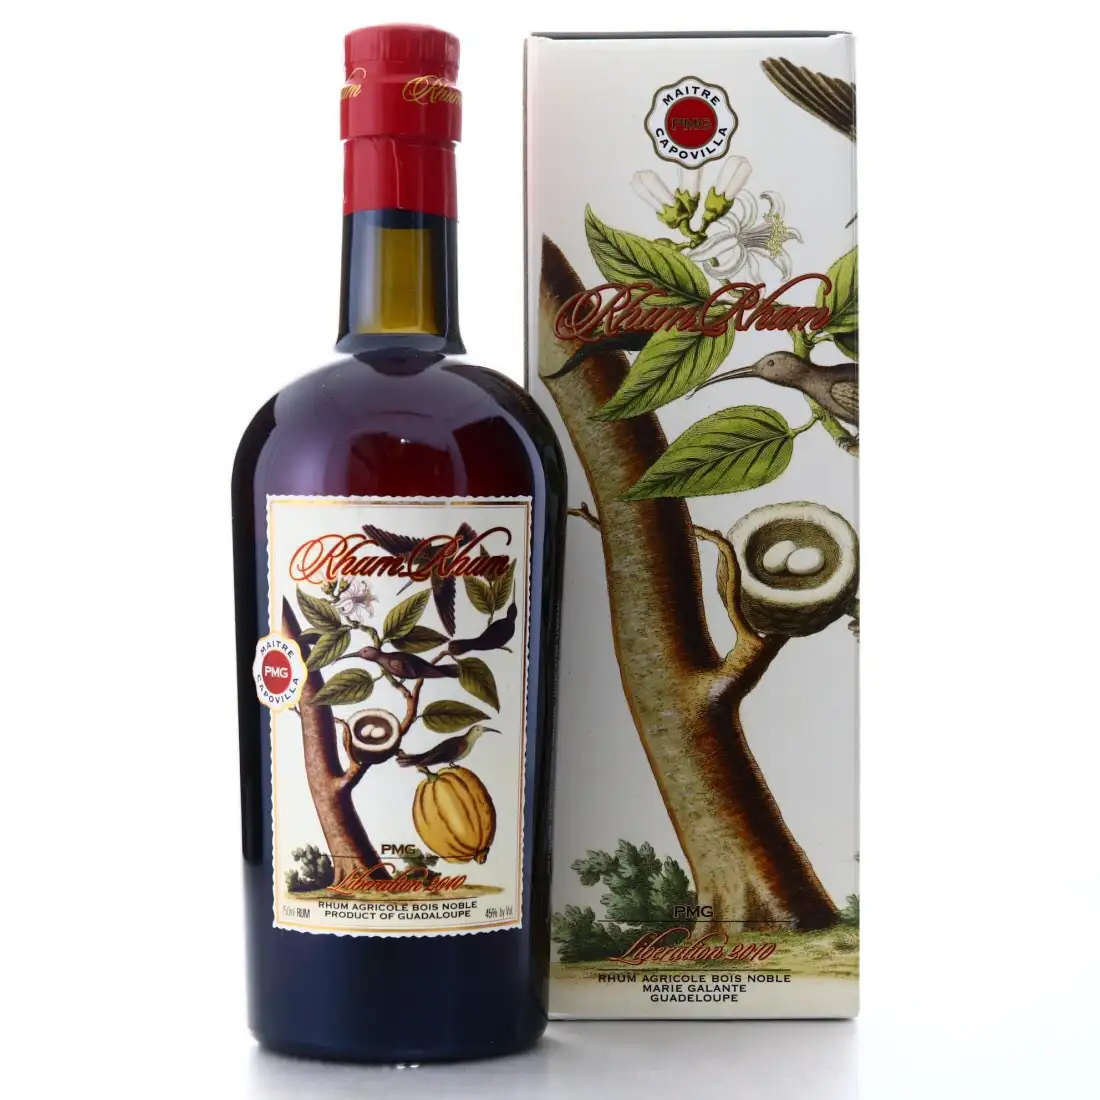 Image of the front of the bottle of the rum Rhum Rhum Libération 2010 US Import